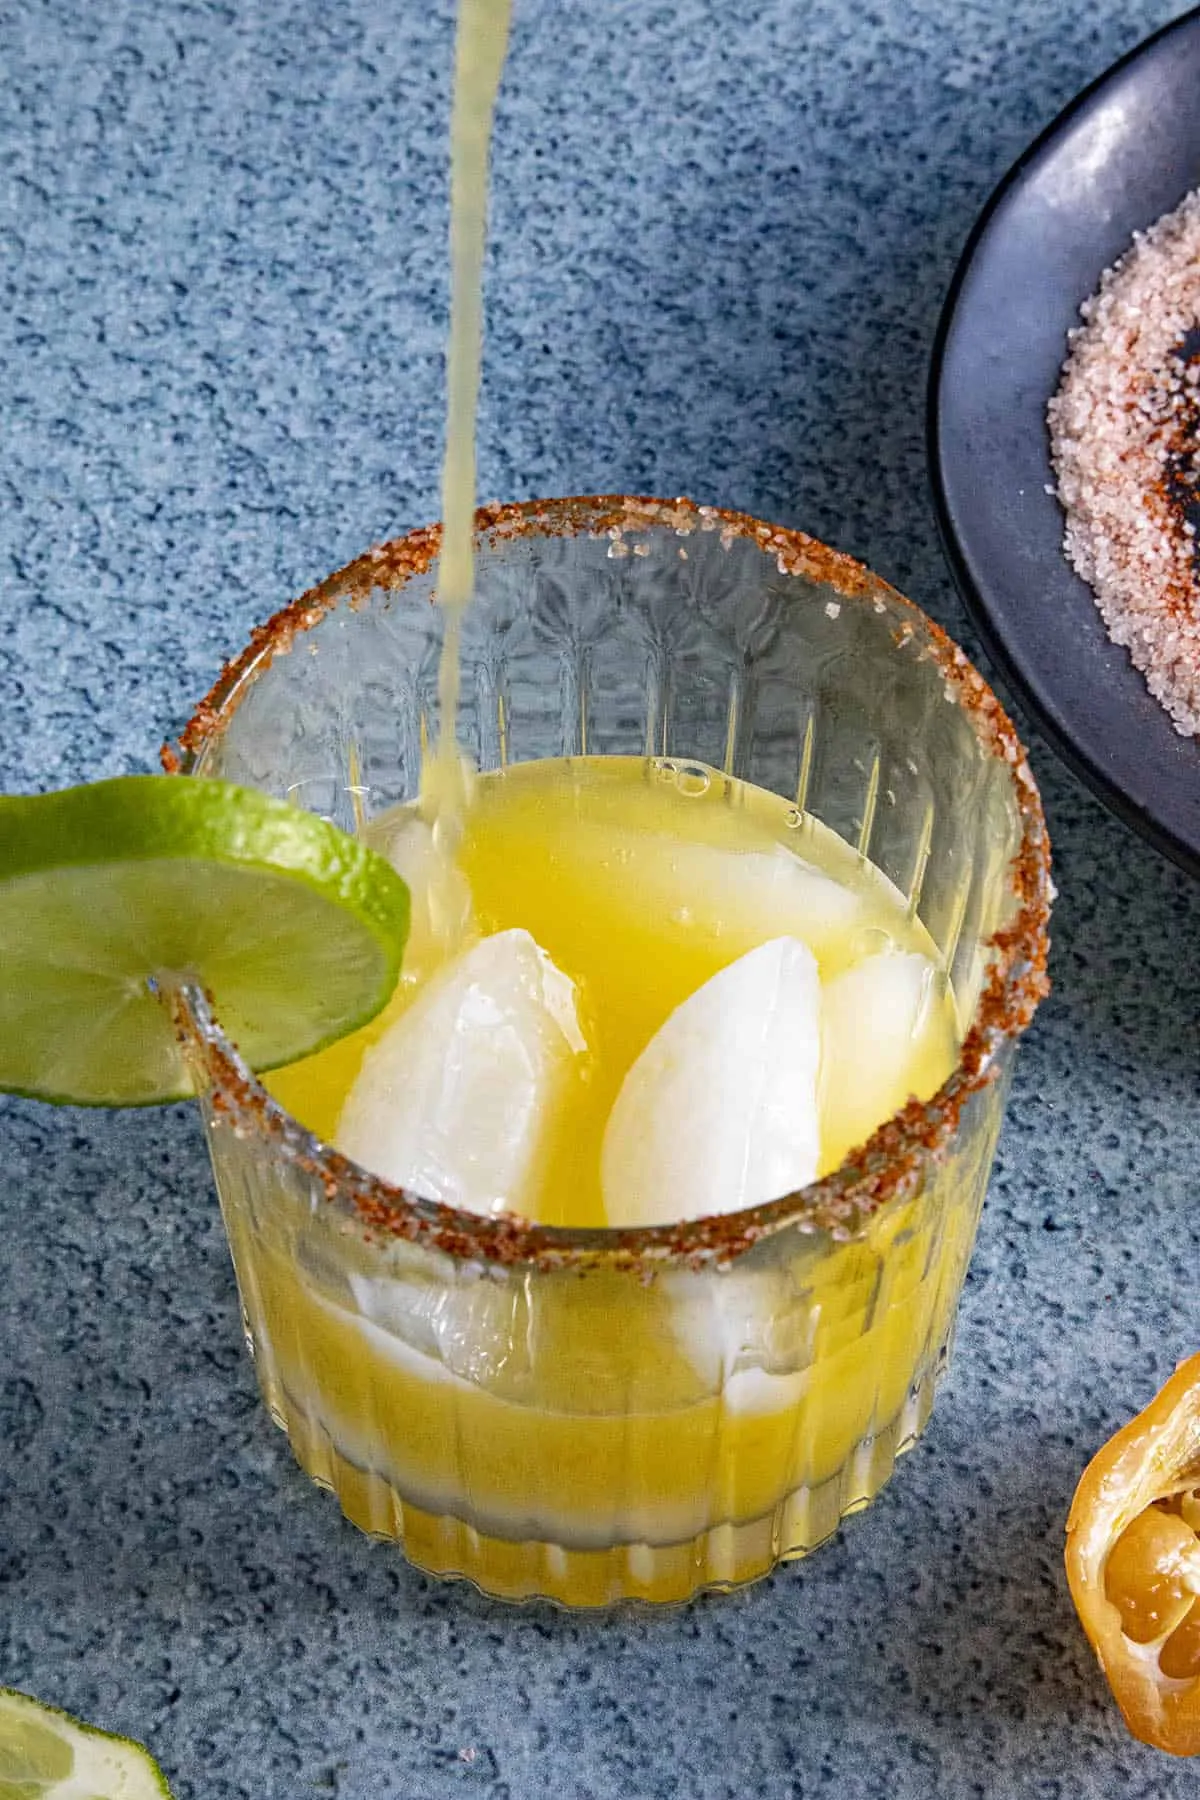 Pouring some Spicy Mango Margarita into a glass with ice